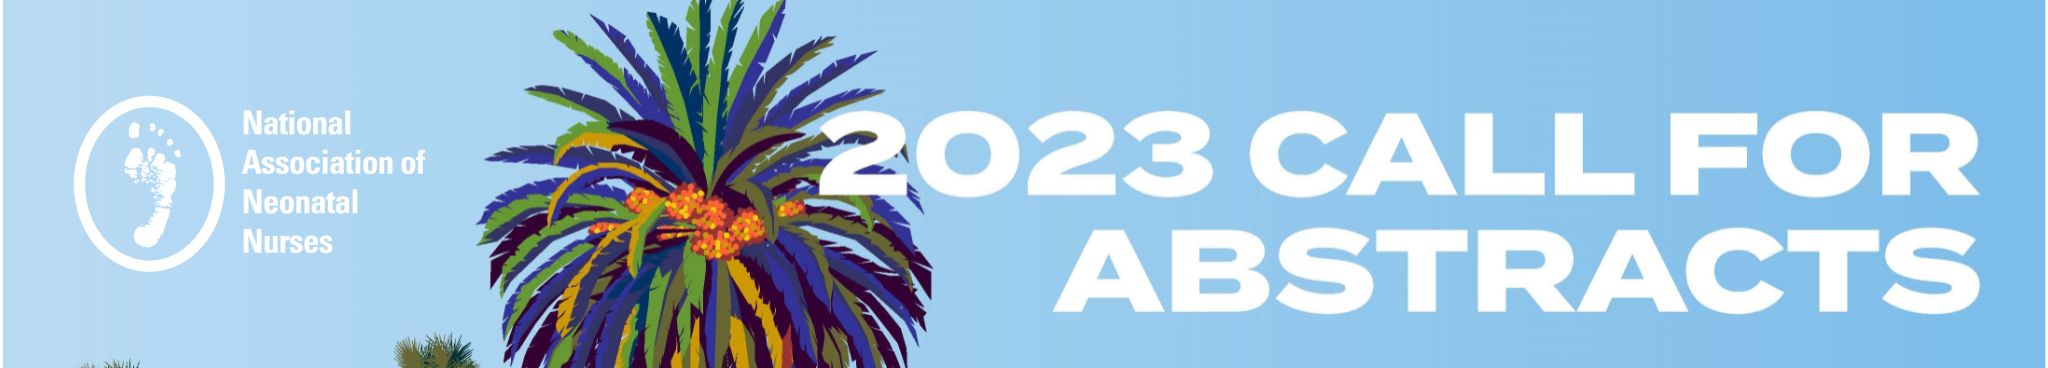 2023 call for abstracts